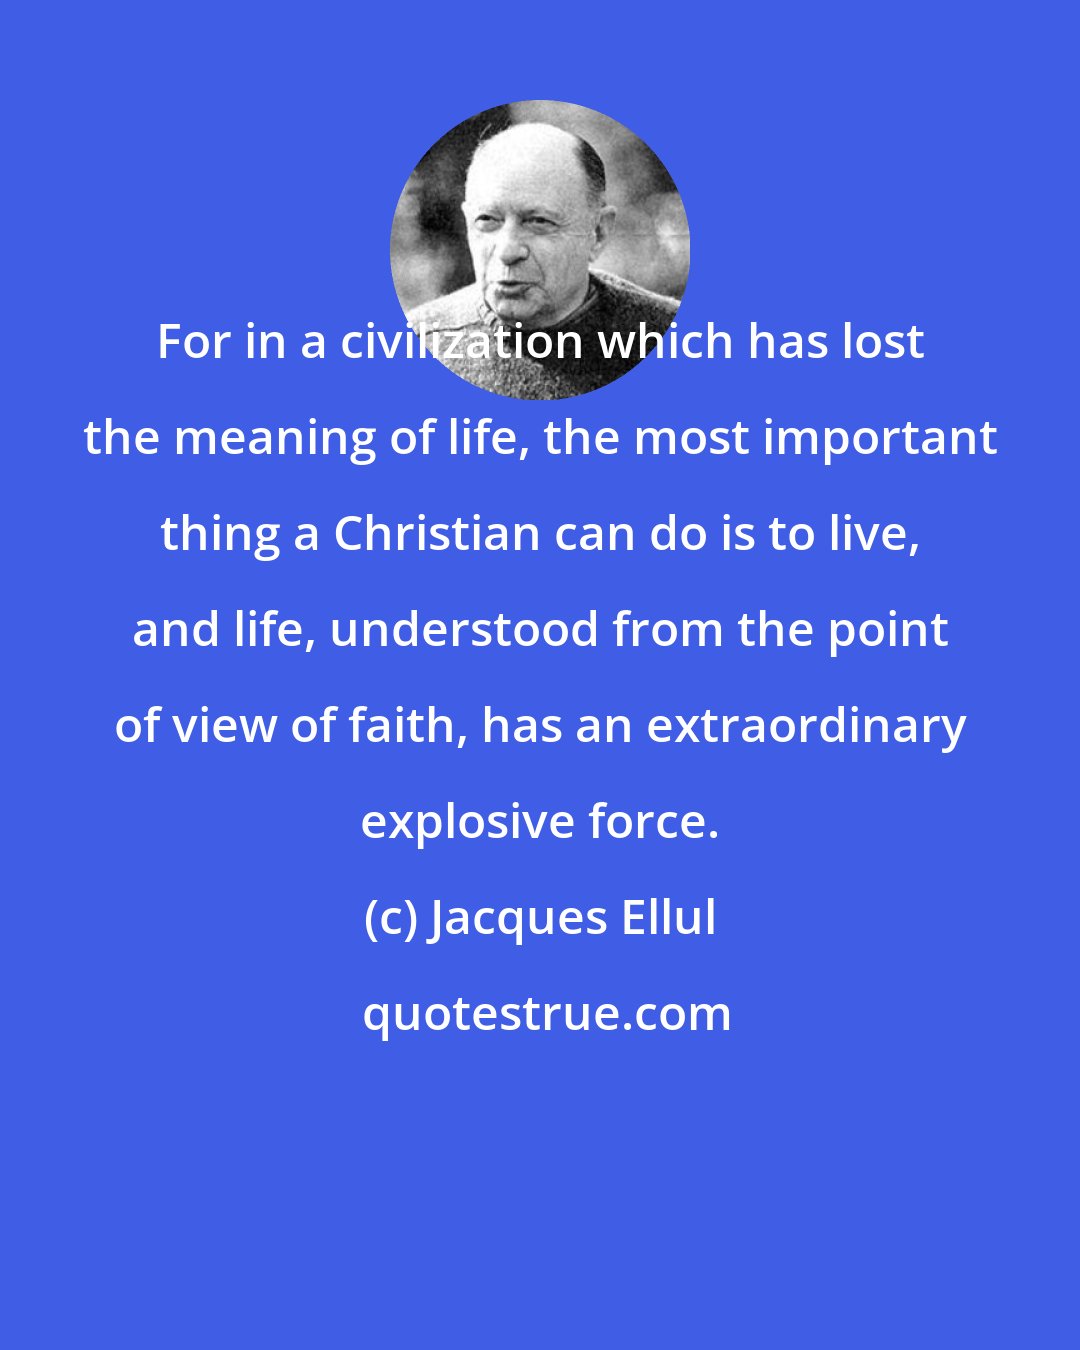 Jacques Ellul: For in a civilization which has lost the meaning of life, the most important thing a Christian can do is to live, and life, understood from the point of view of faith, has an extraordinary explosive force.